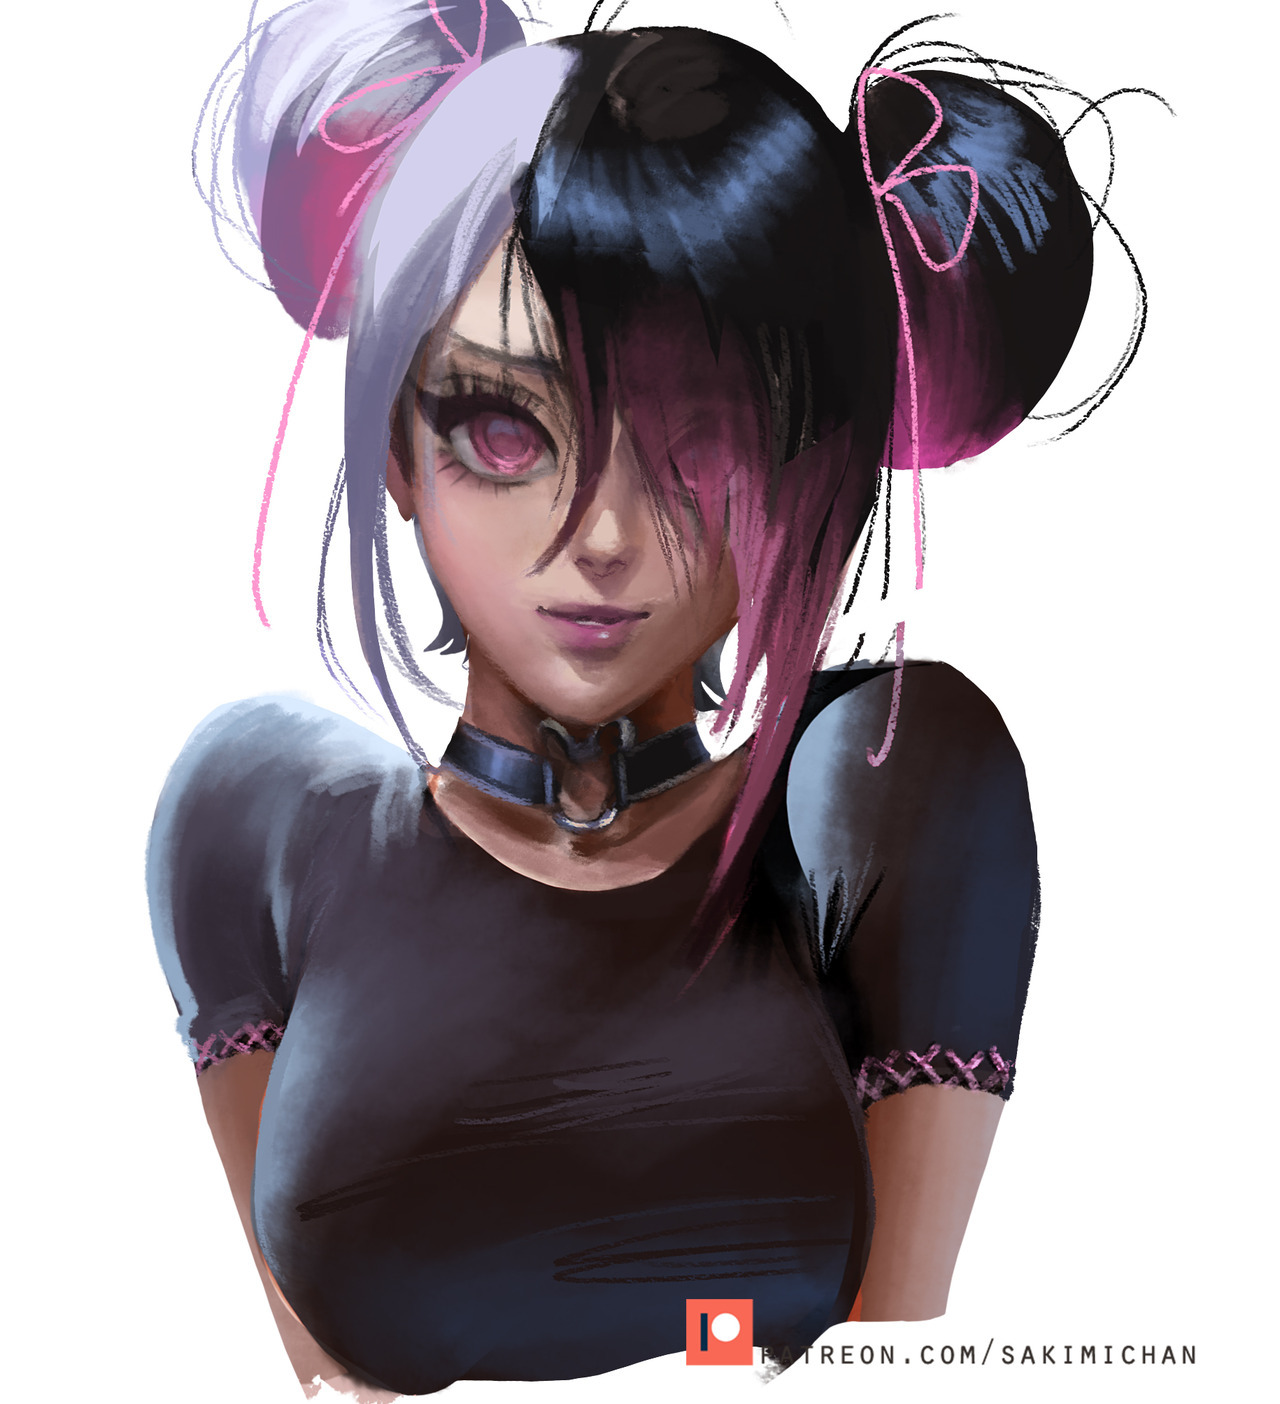 sakimichan:   finished result from this terms tutorial :3 &gt;https://www.patreon.com/posts/22065869